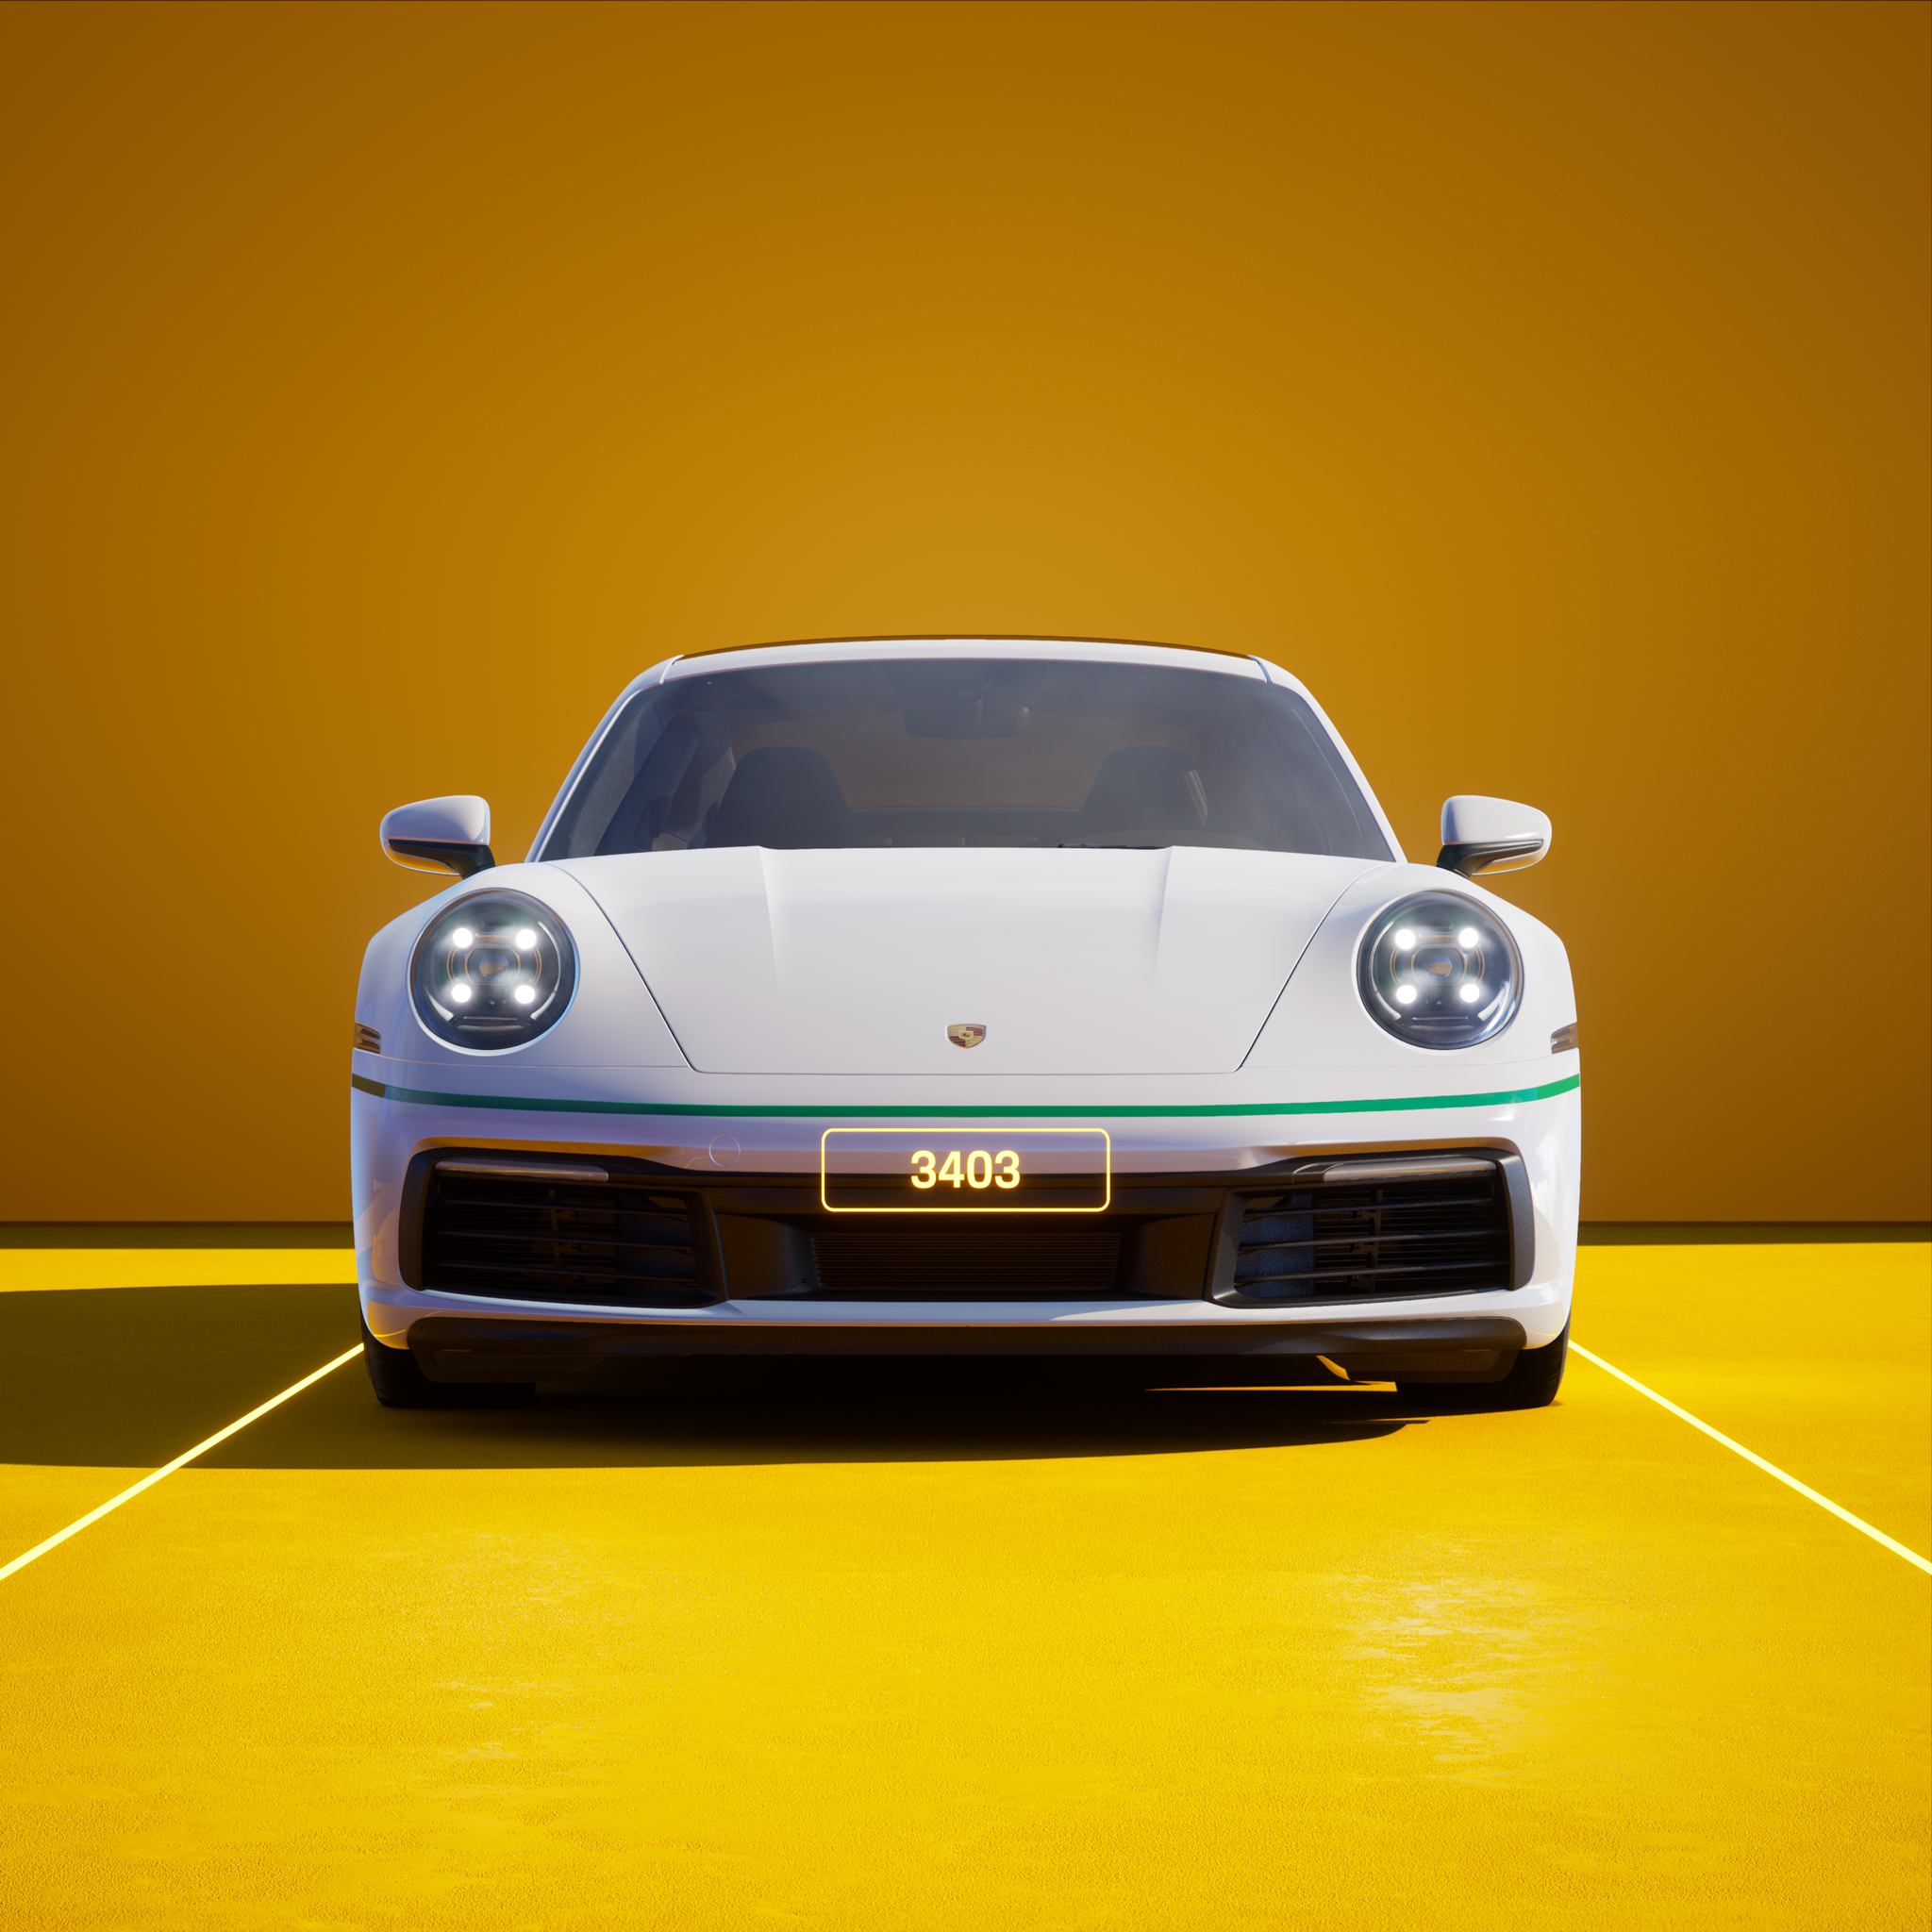 The PORSCHΞ 911 3403 image in phase